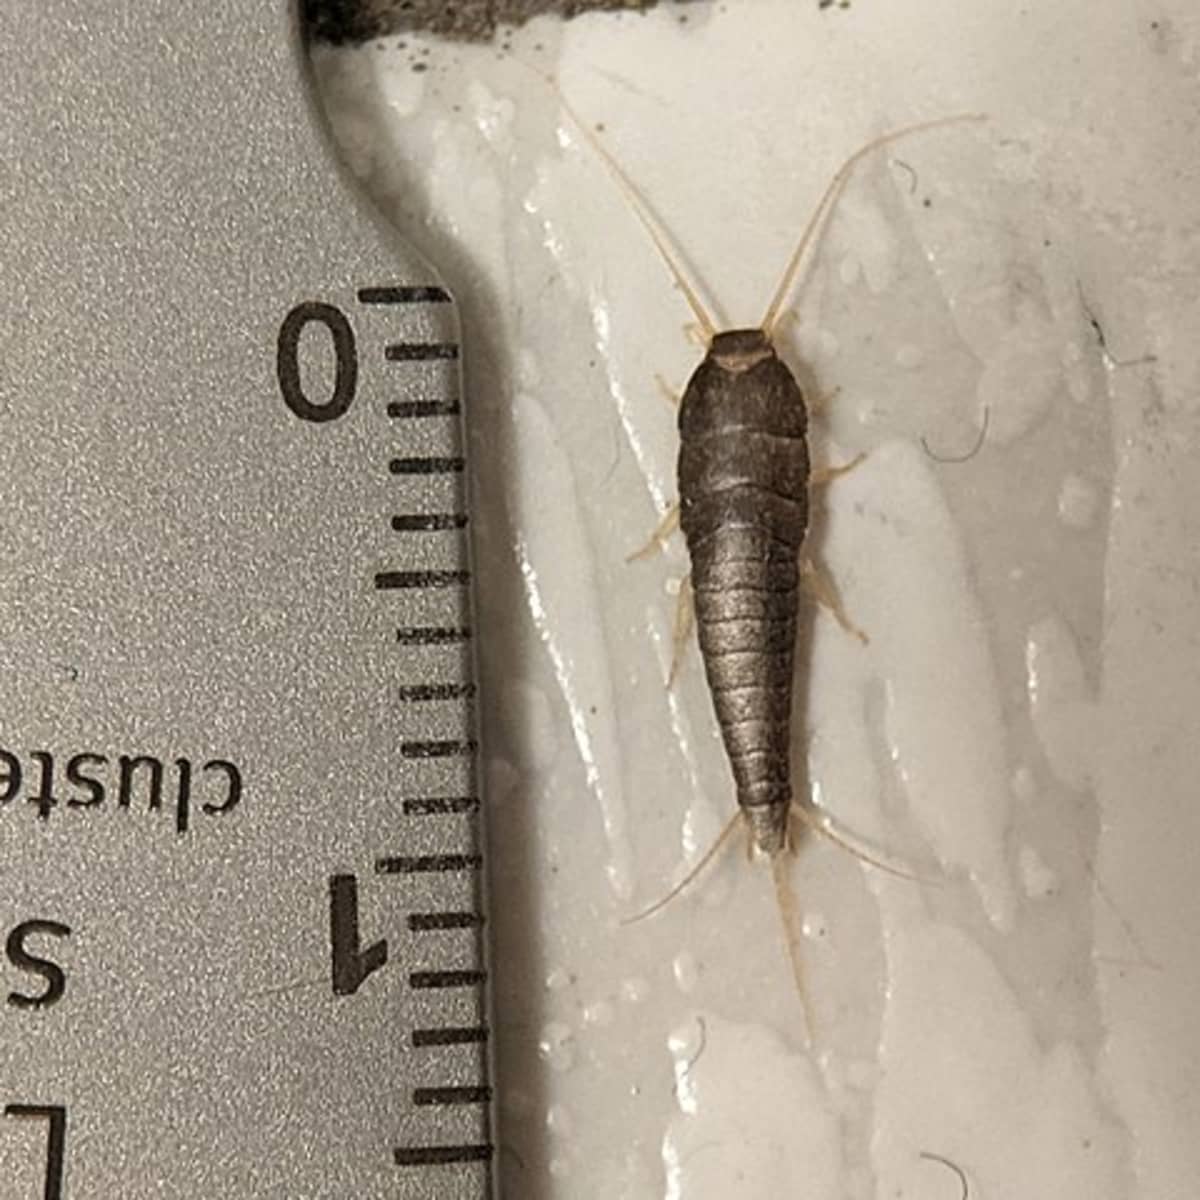 How to Get Rid of Silverfish Infestation